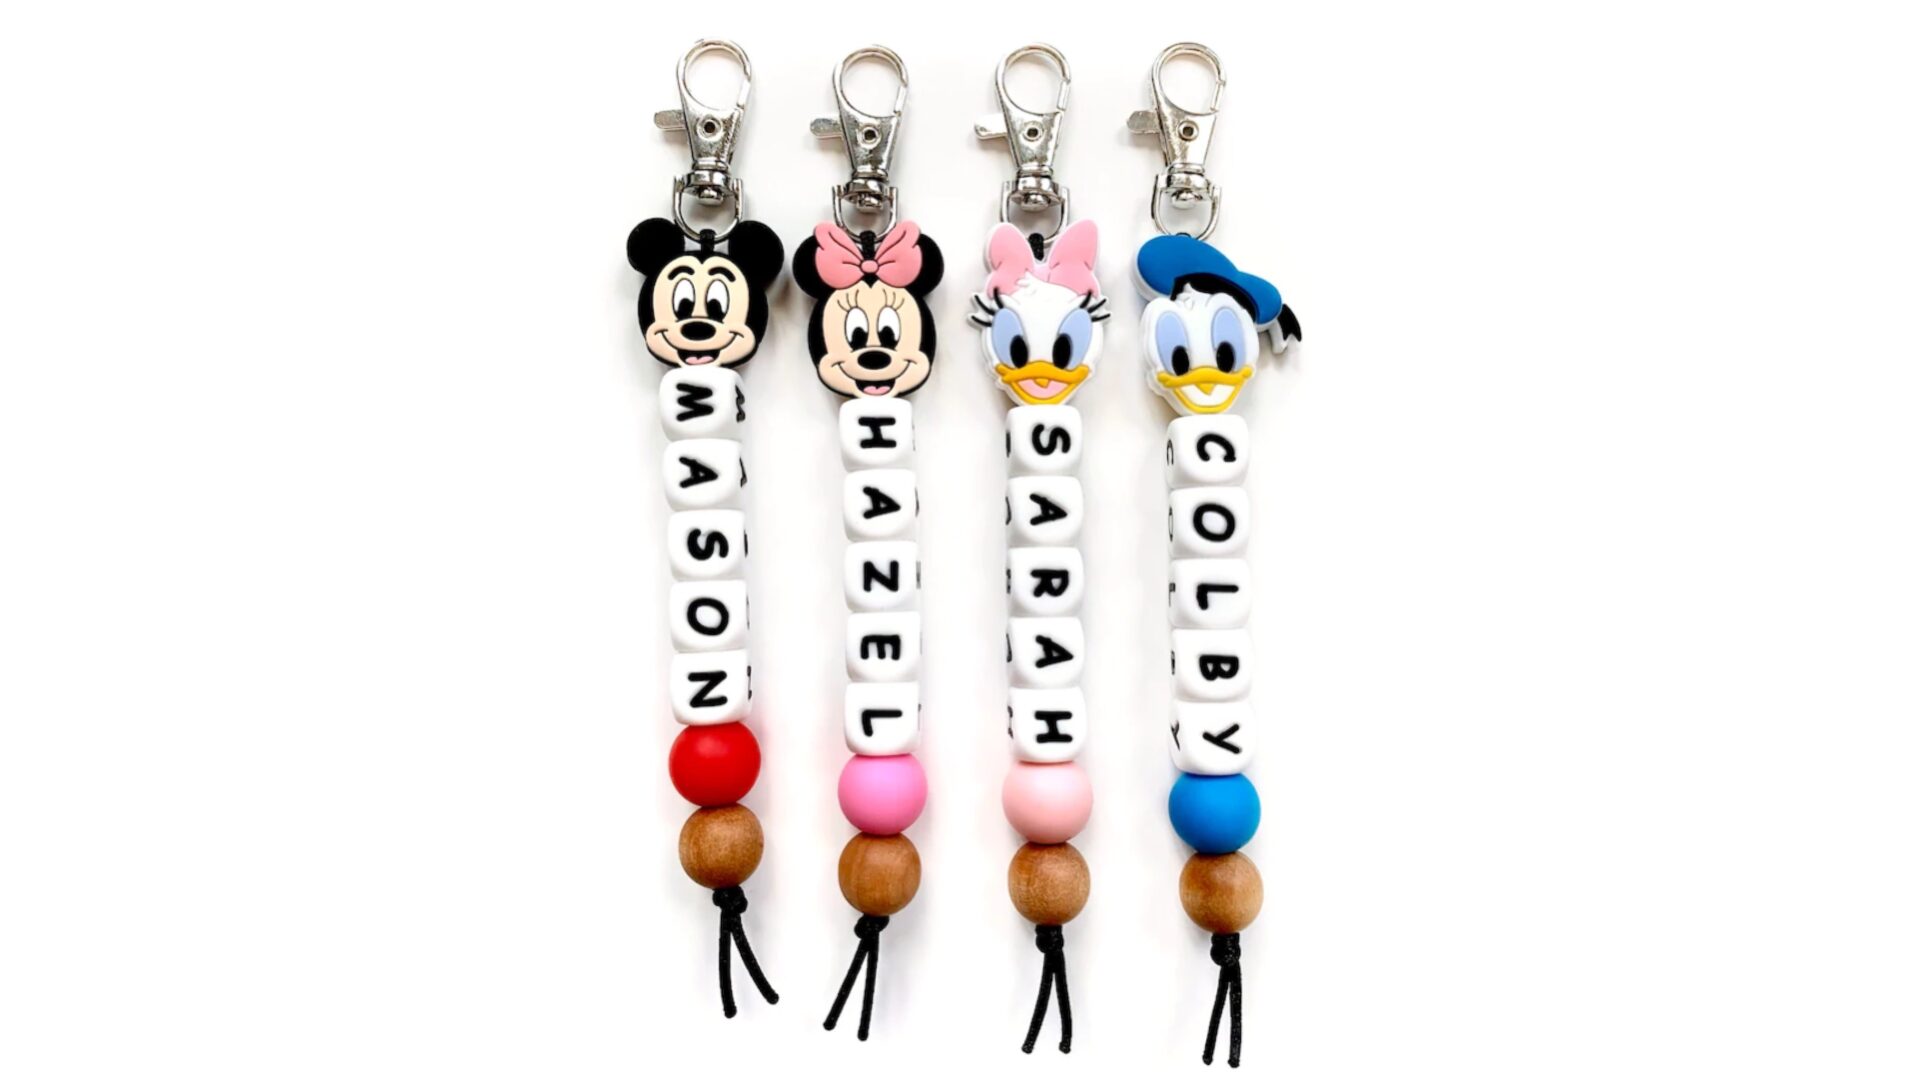 Personalized Disney Keychains To Bring The Magic Anywhere You Go!